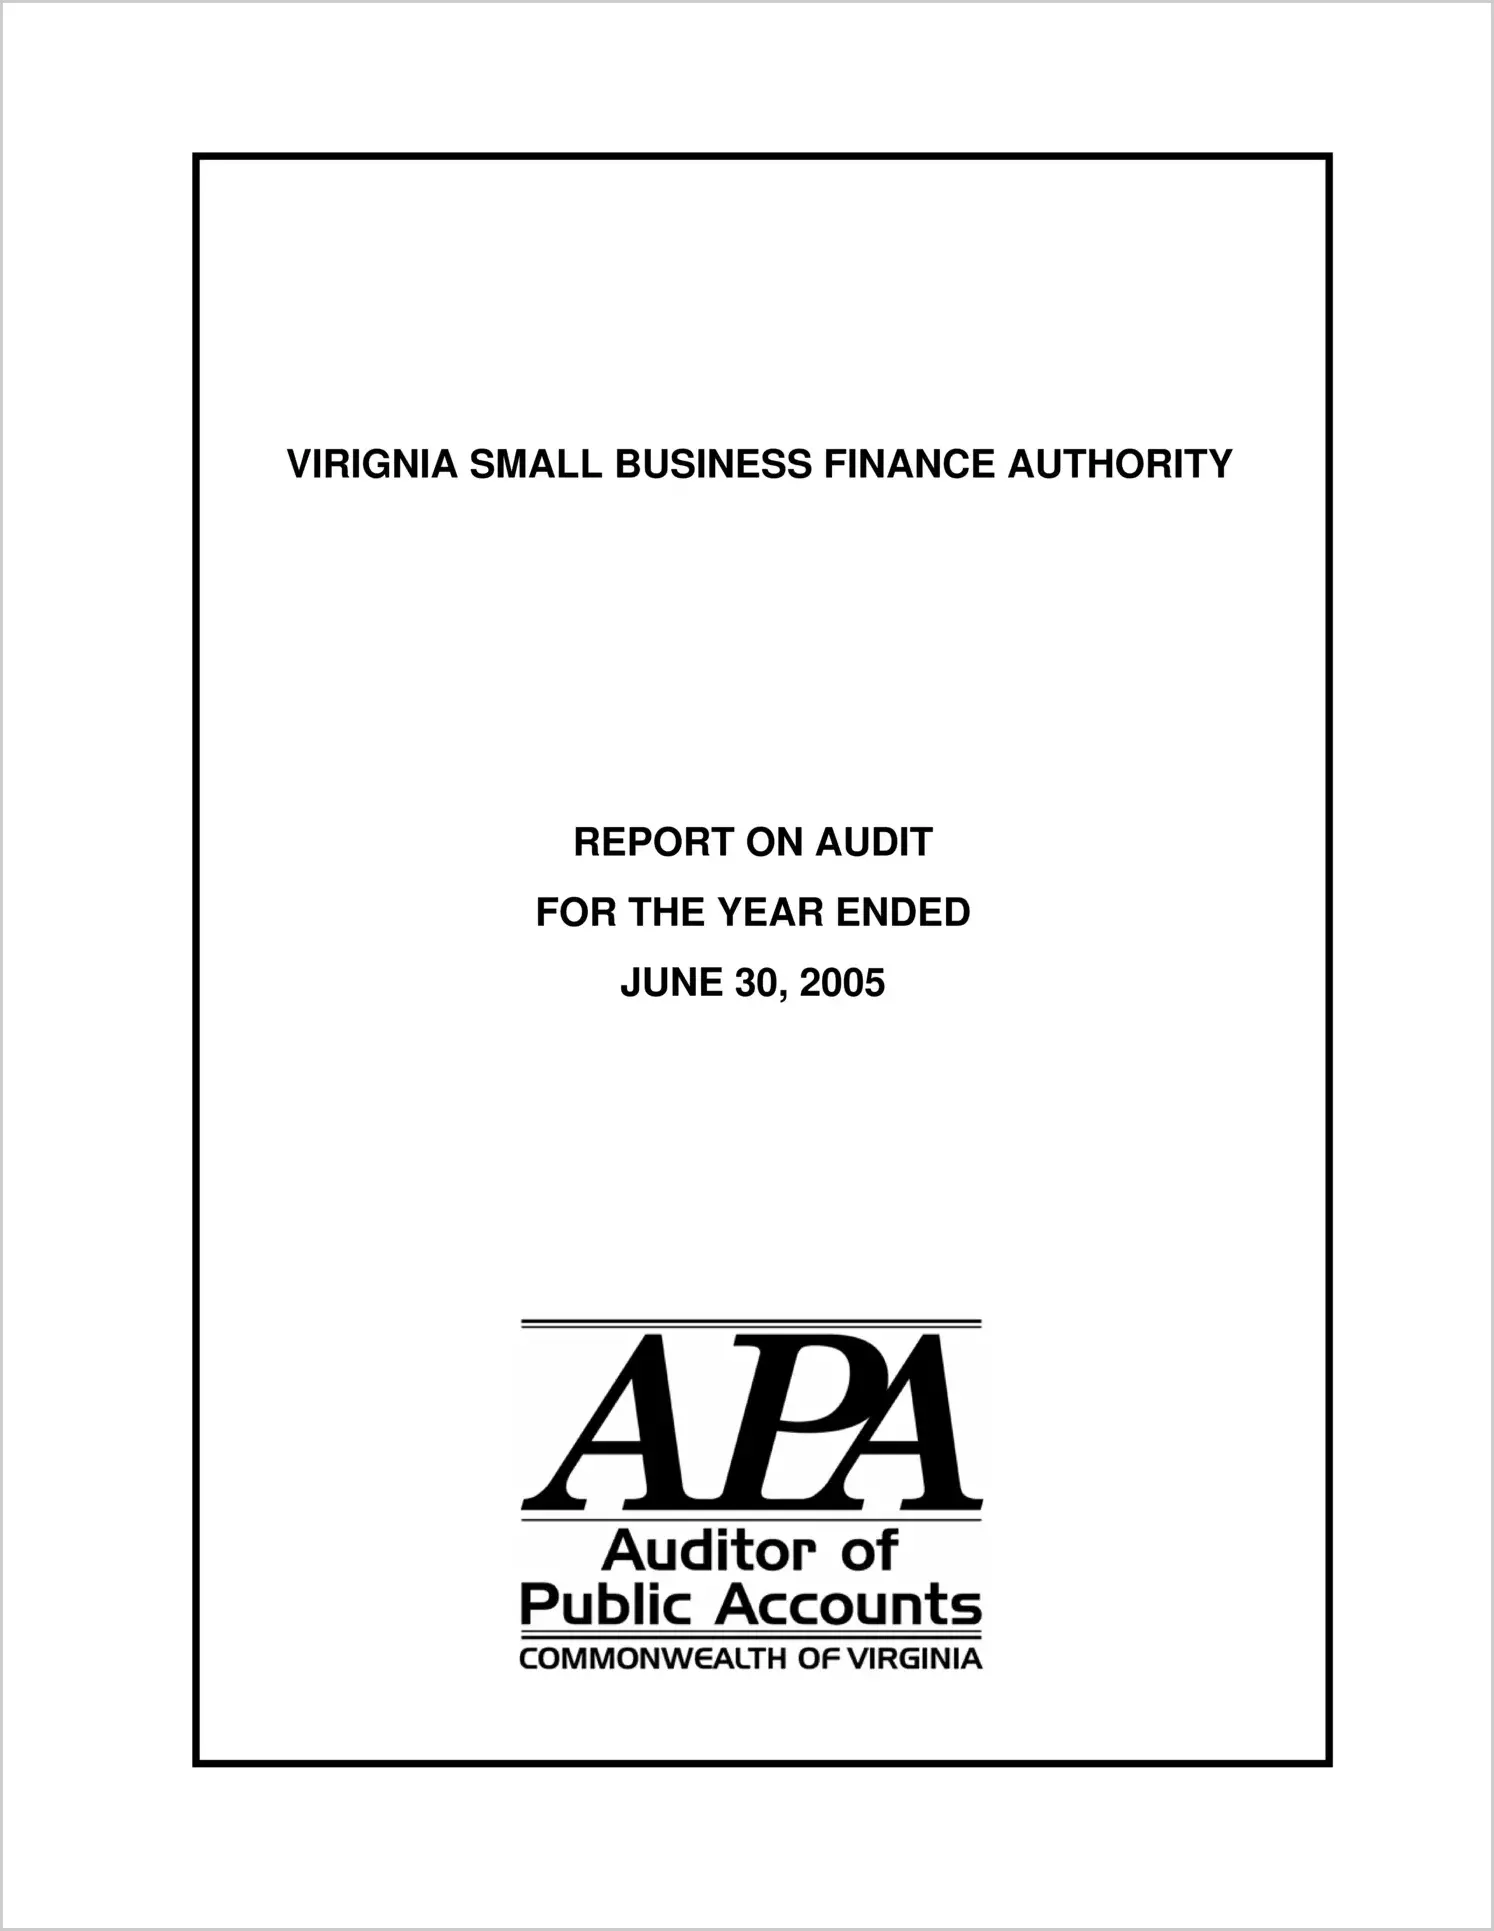 Virginia Small Business Financing Authority for the year ended June 30, 2005